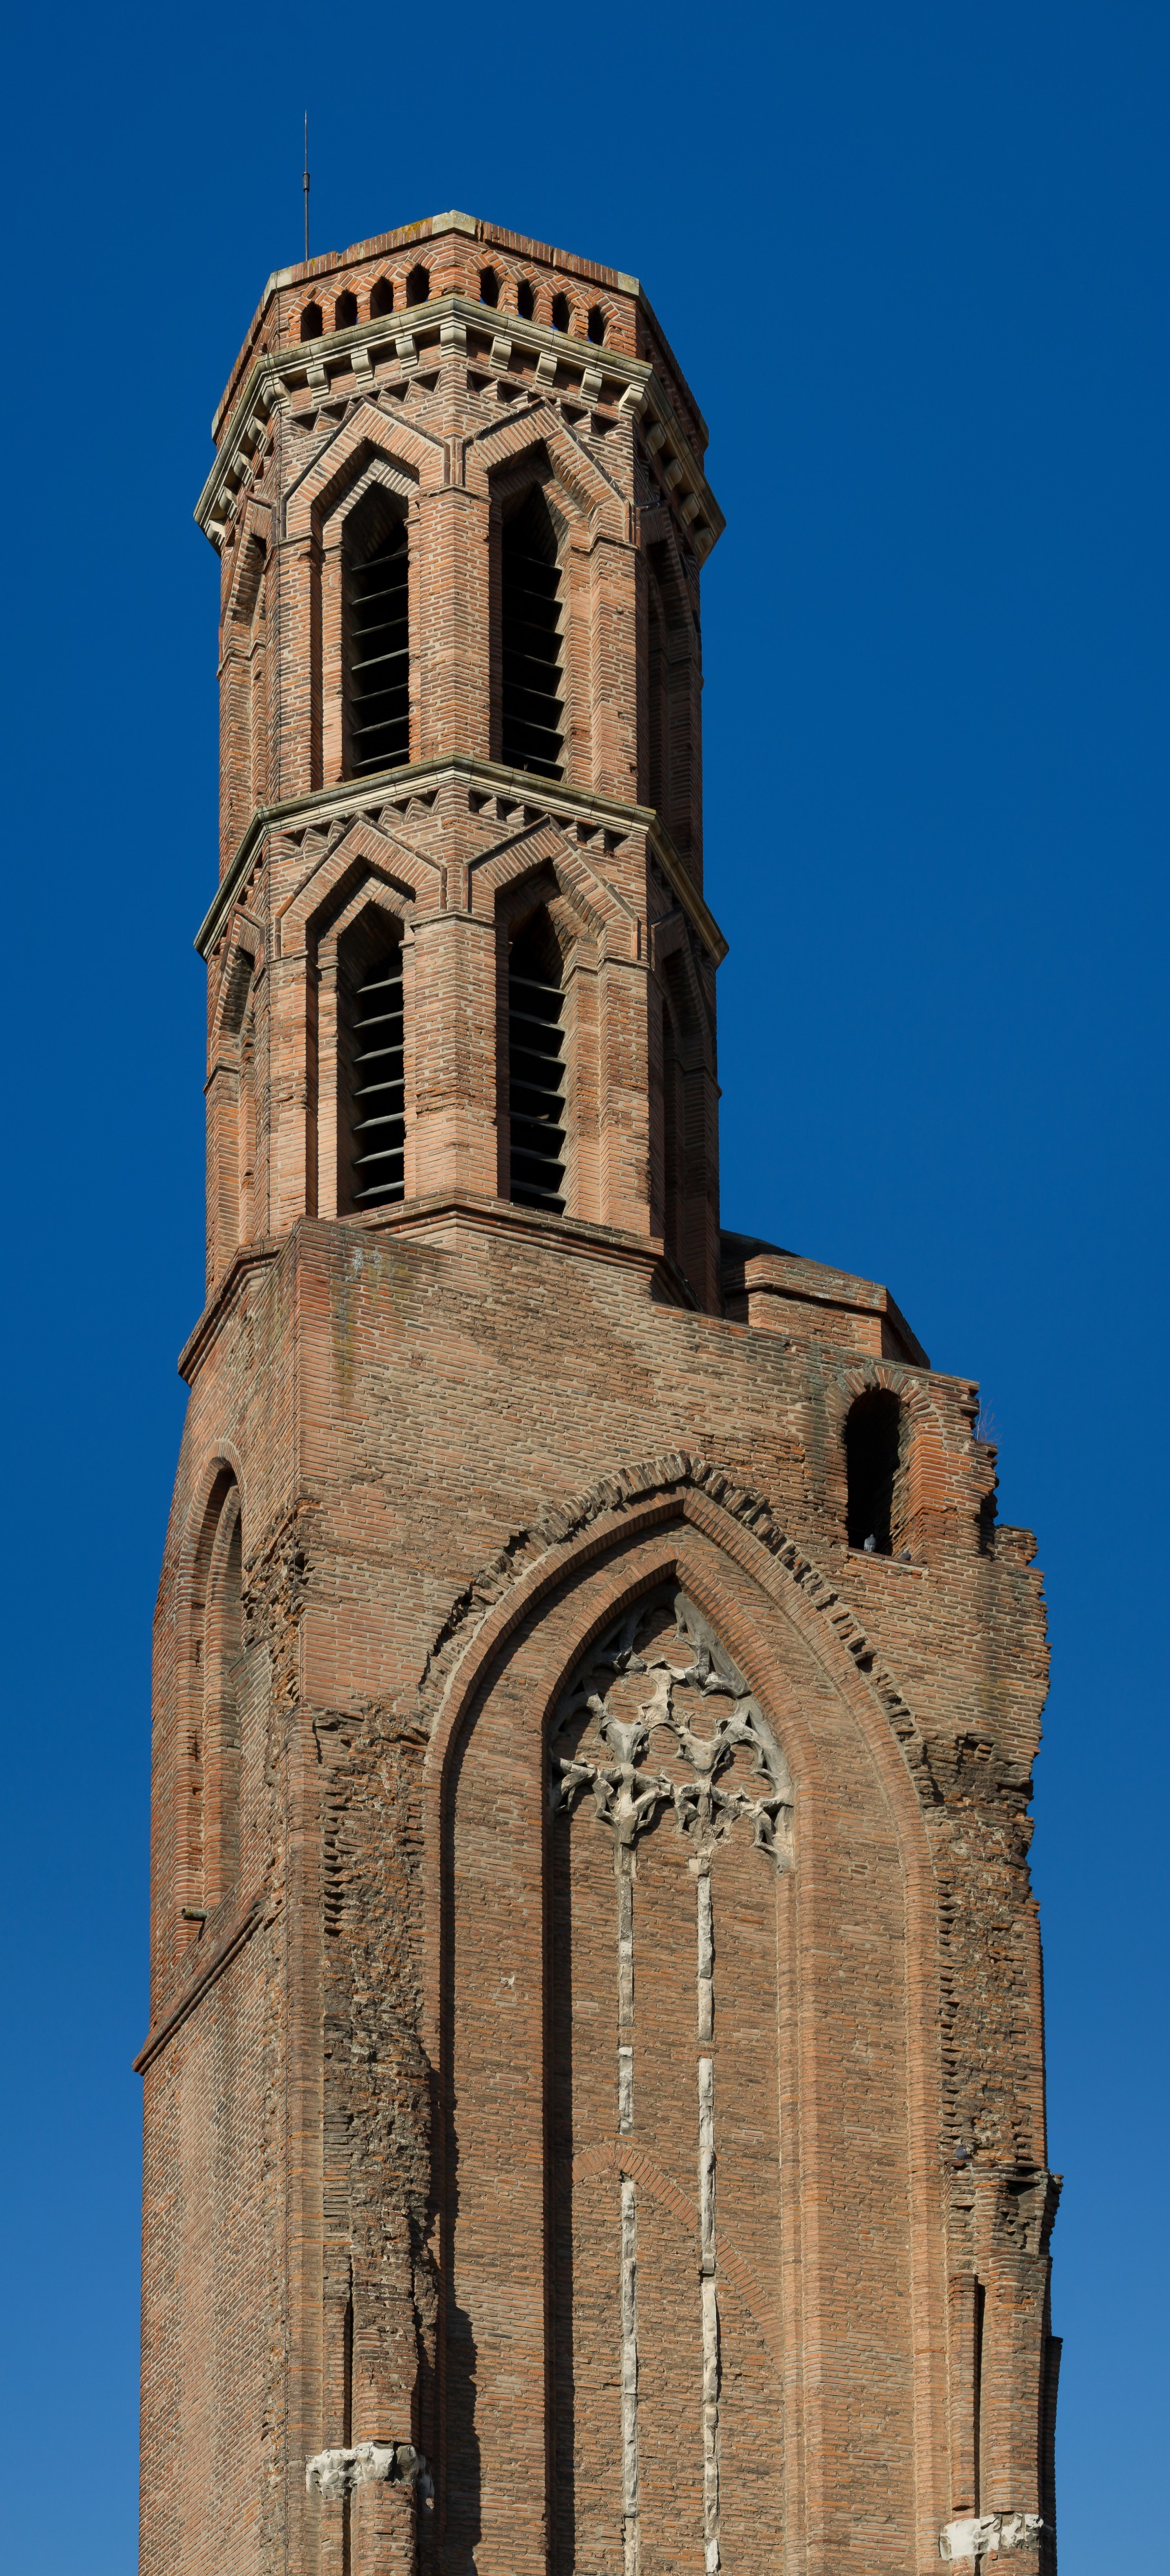 Bell tower of église des cordeliers in Toulouse